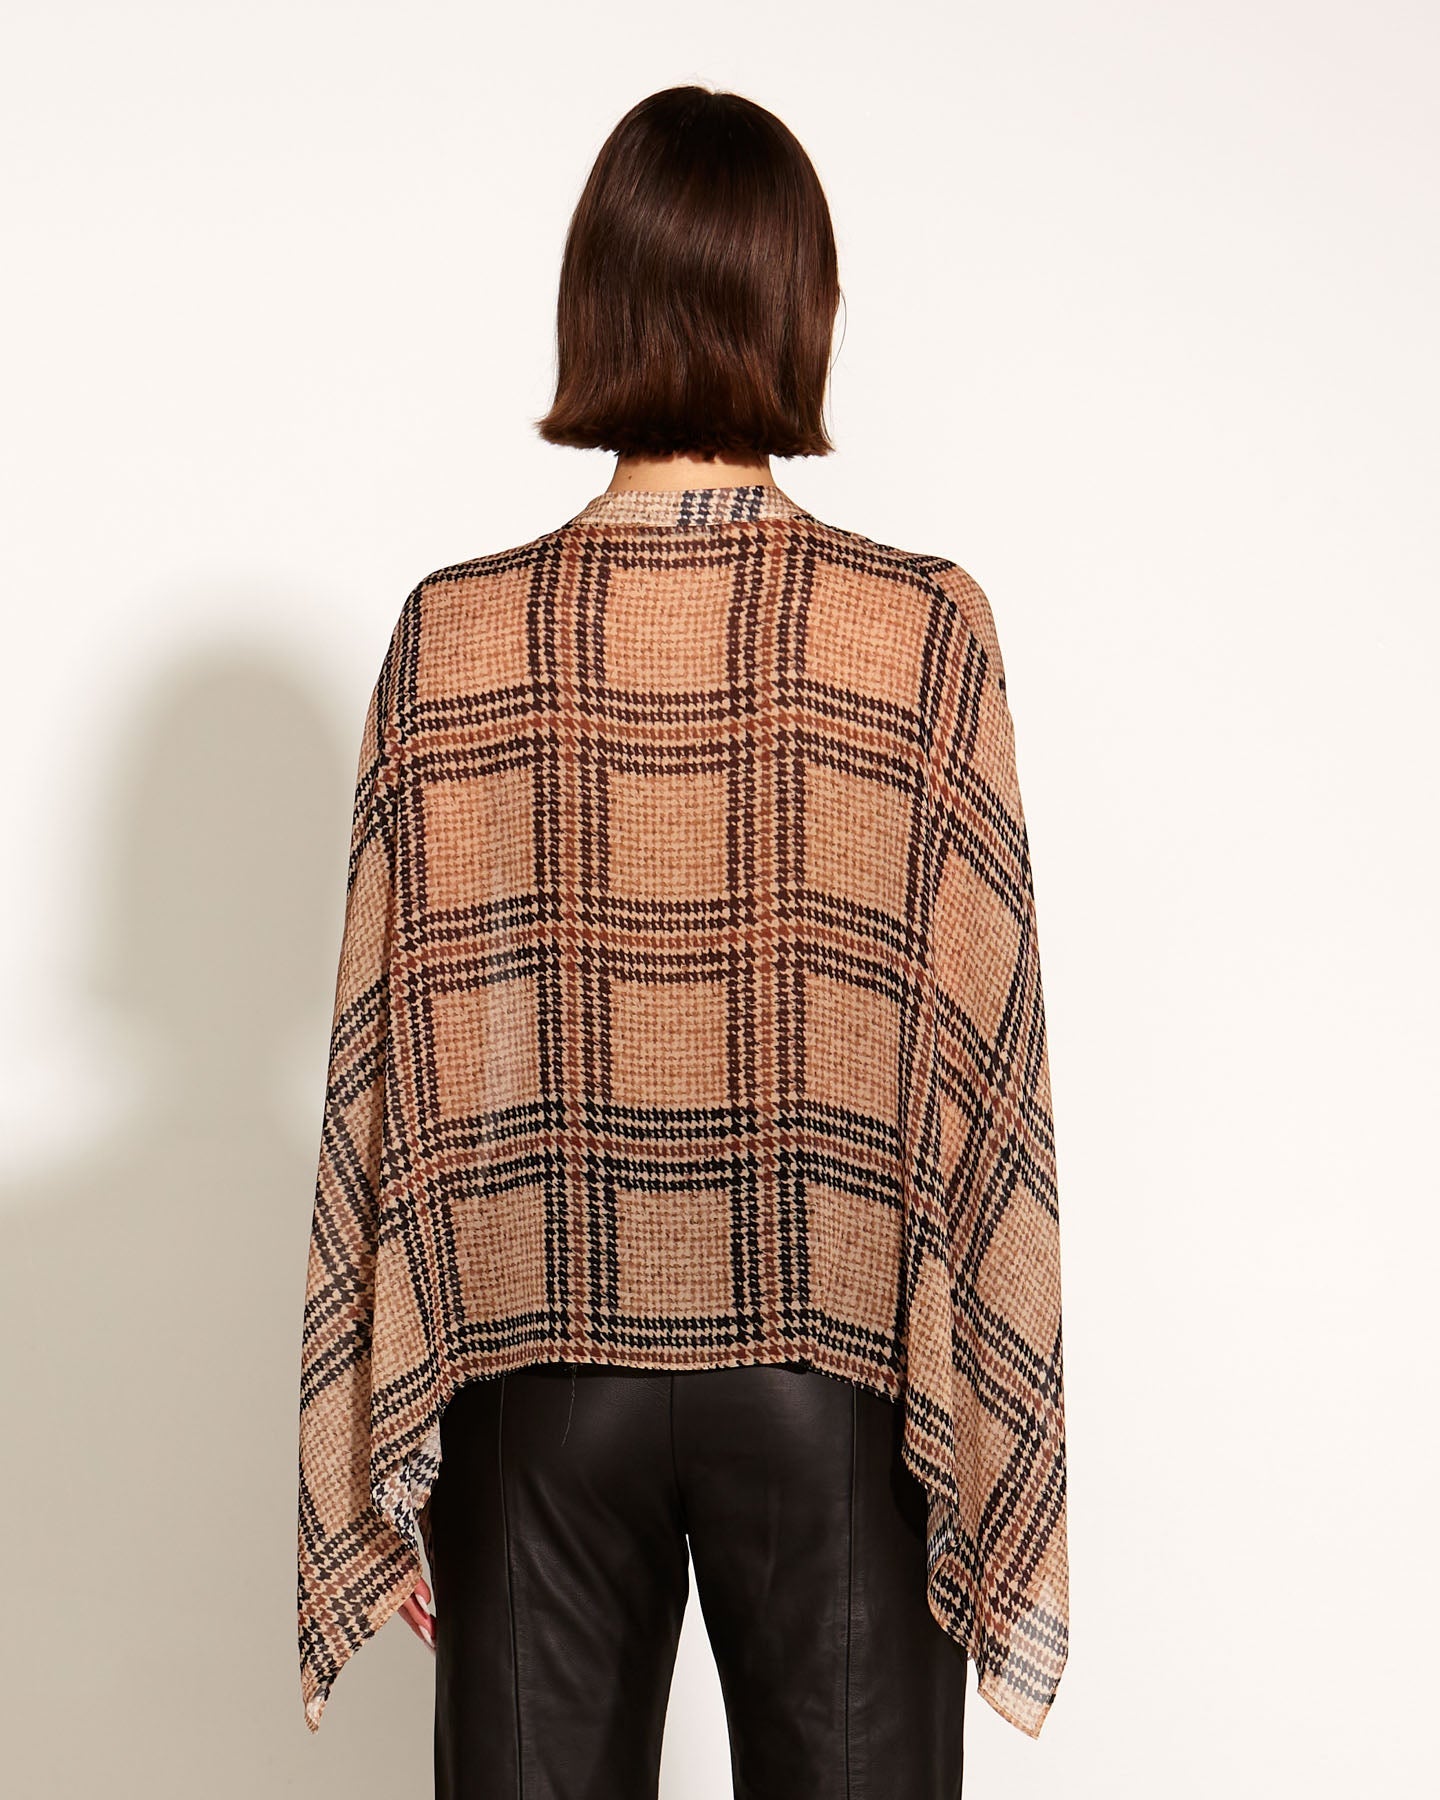 Fate+Becker Something Beautiful Oversized Flowy Blouse - Houndstooth Check